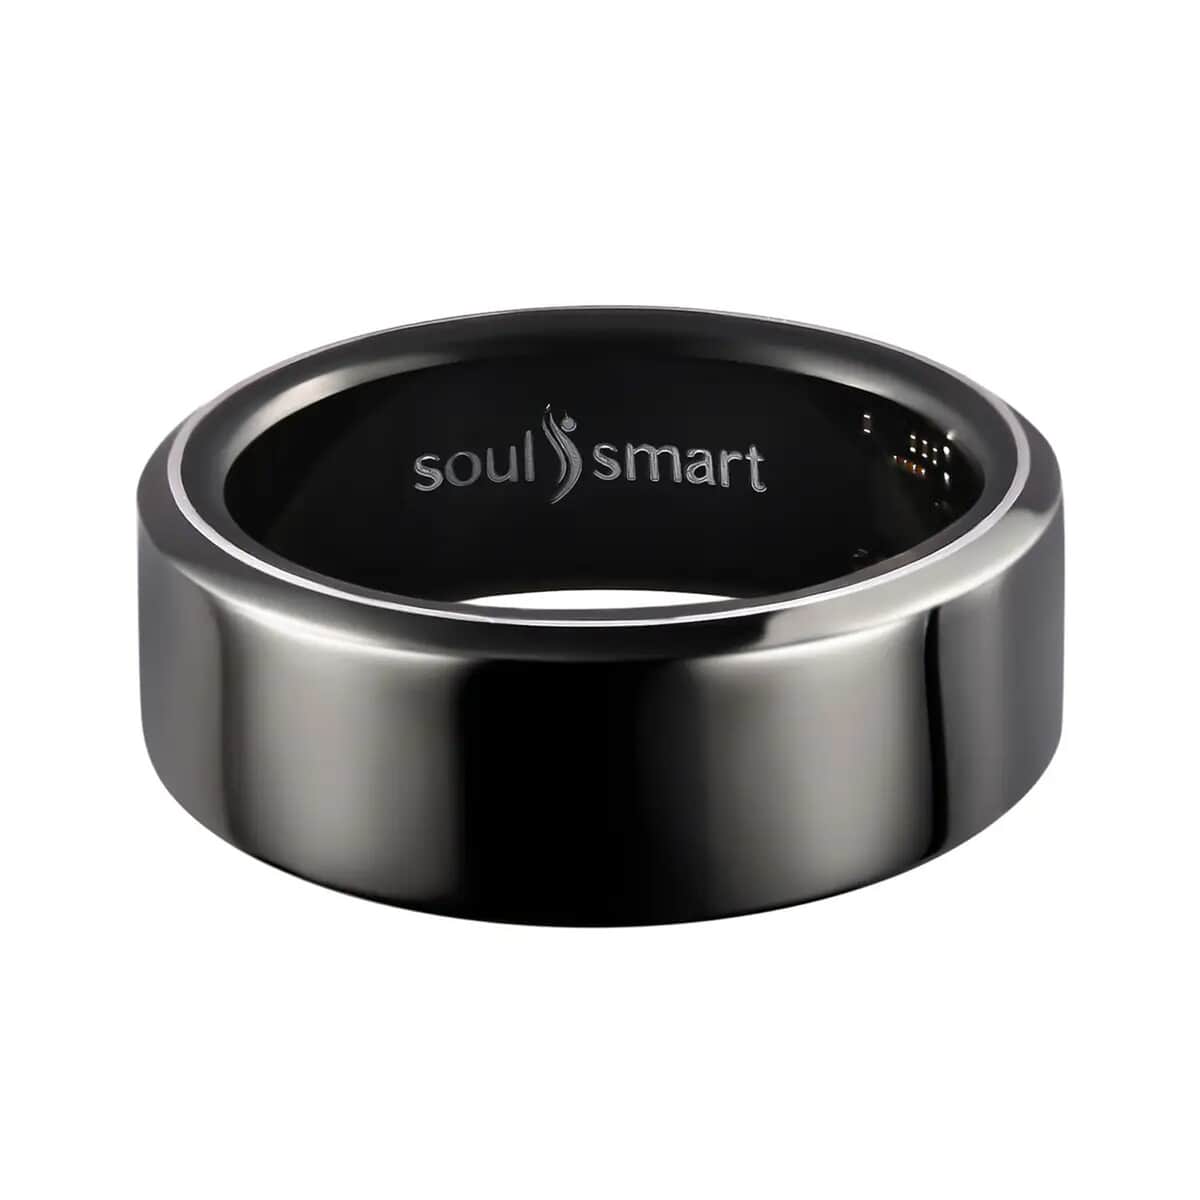 Soulsmart Multifunctional Health Tracker Smart Ring (Size 10.0) in ION Plated Black Stainless Steel (Compatible with Android 5.0+ & Apple IOS 10.0+ Systems) (Del. in 10-15 Days) image number 2